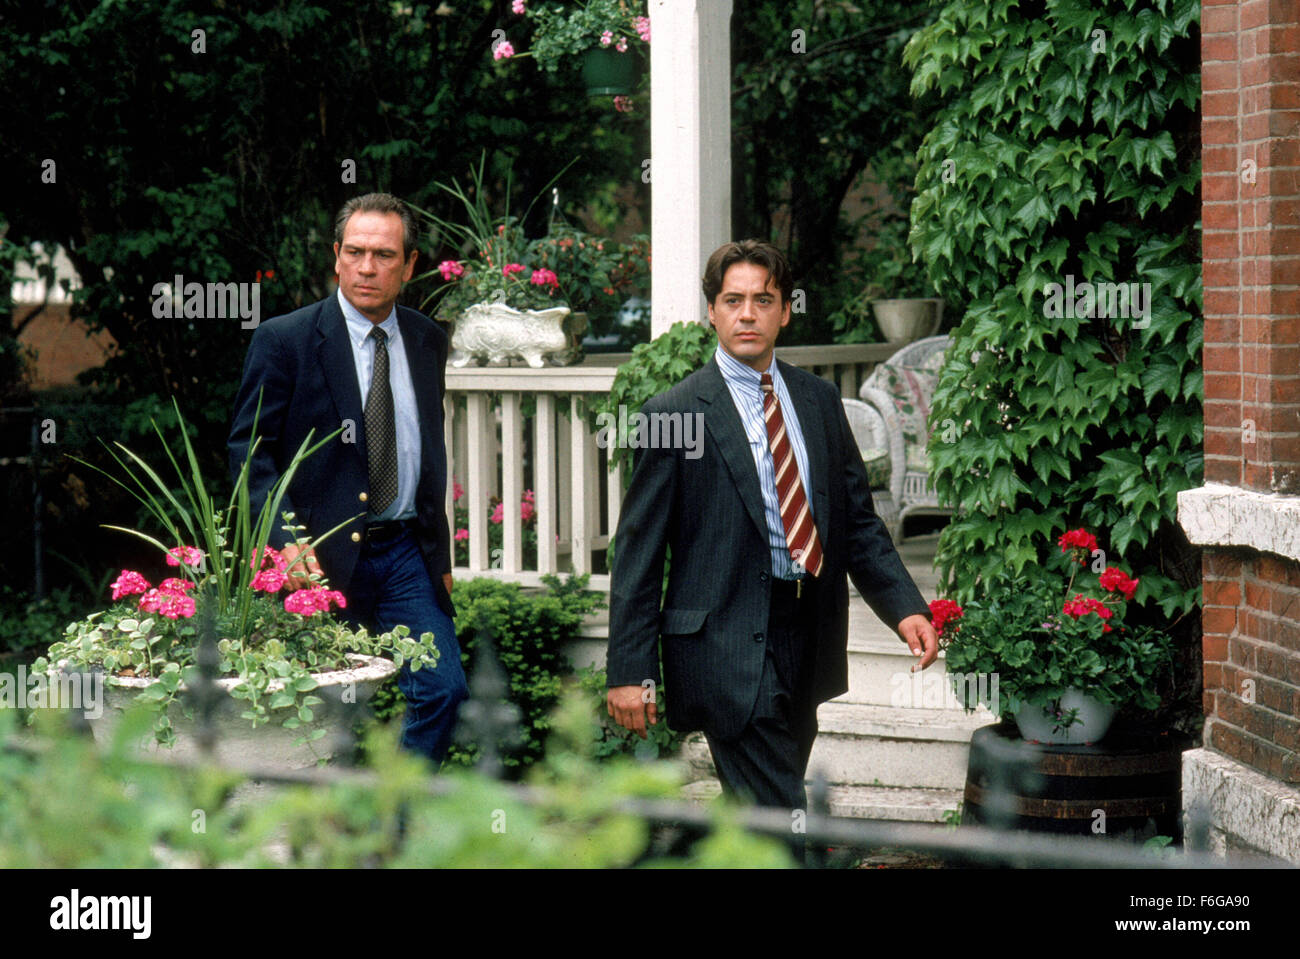 RELEASE DATE: 6 March 1998. MOVIE TITLE: U.S. Marshals STUDIO: Kopelson Entertainment. PLOT: US Marshal Samuel Gerard and his team of Marshals are assigned to track down Sheridan, a murderer and robber. PICTURED: TOMMY LEE JONES as Chief Deputy Marshal Samuel Gerard and ROBERT DOWNEY JR. as Special Agent John Royce. Stock Photo